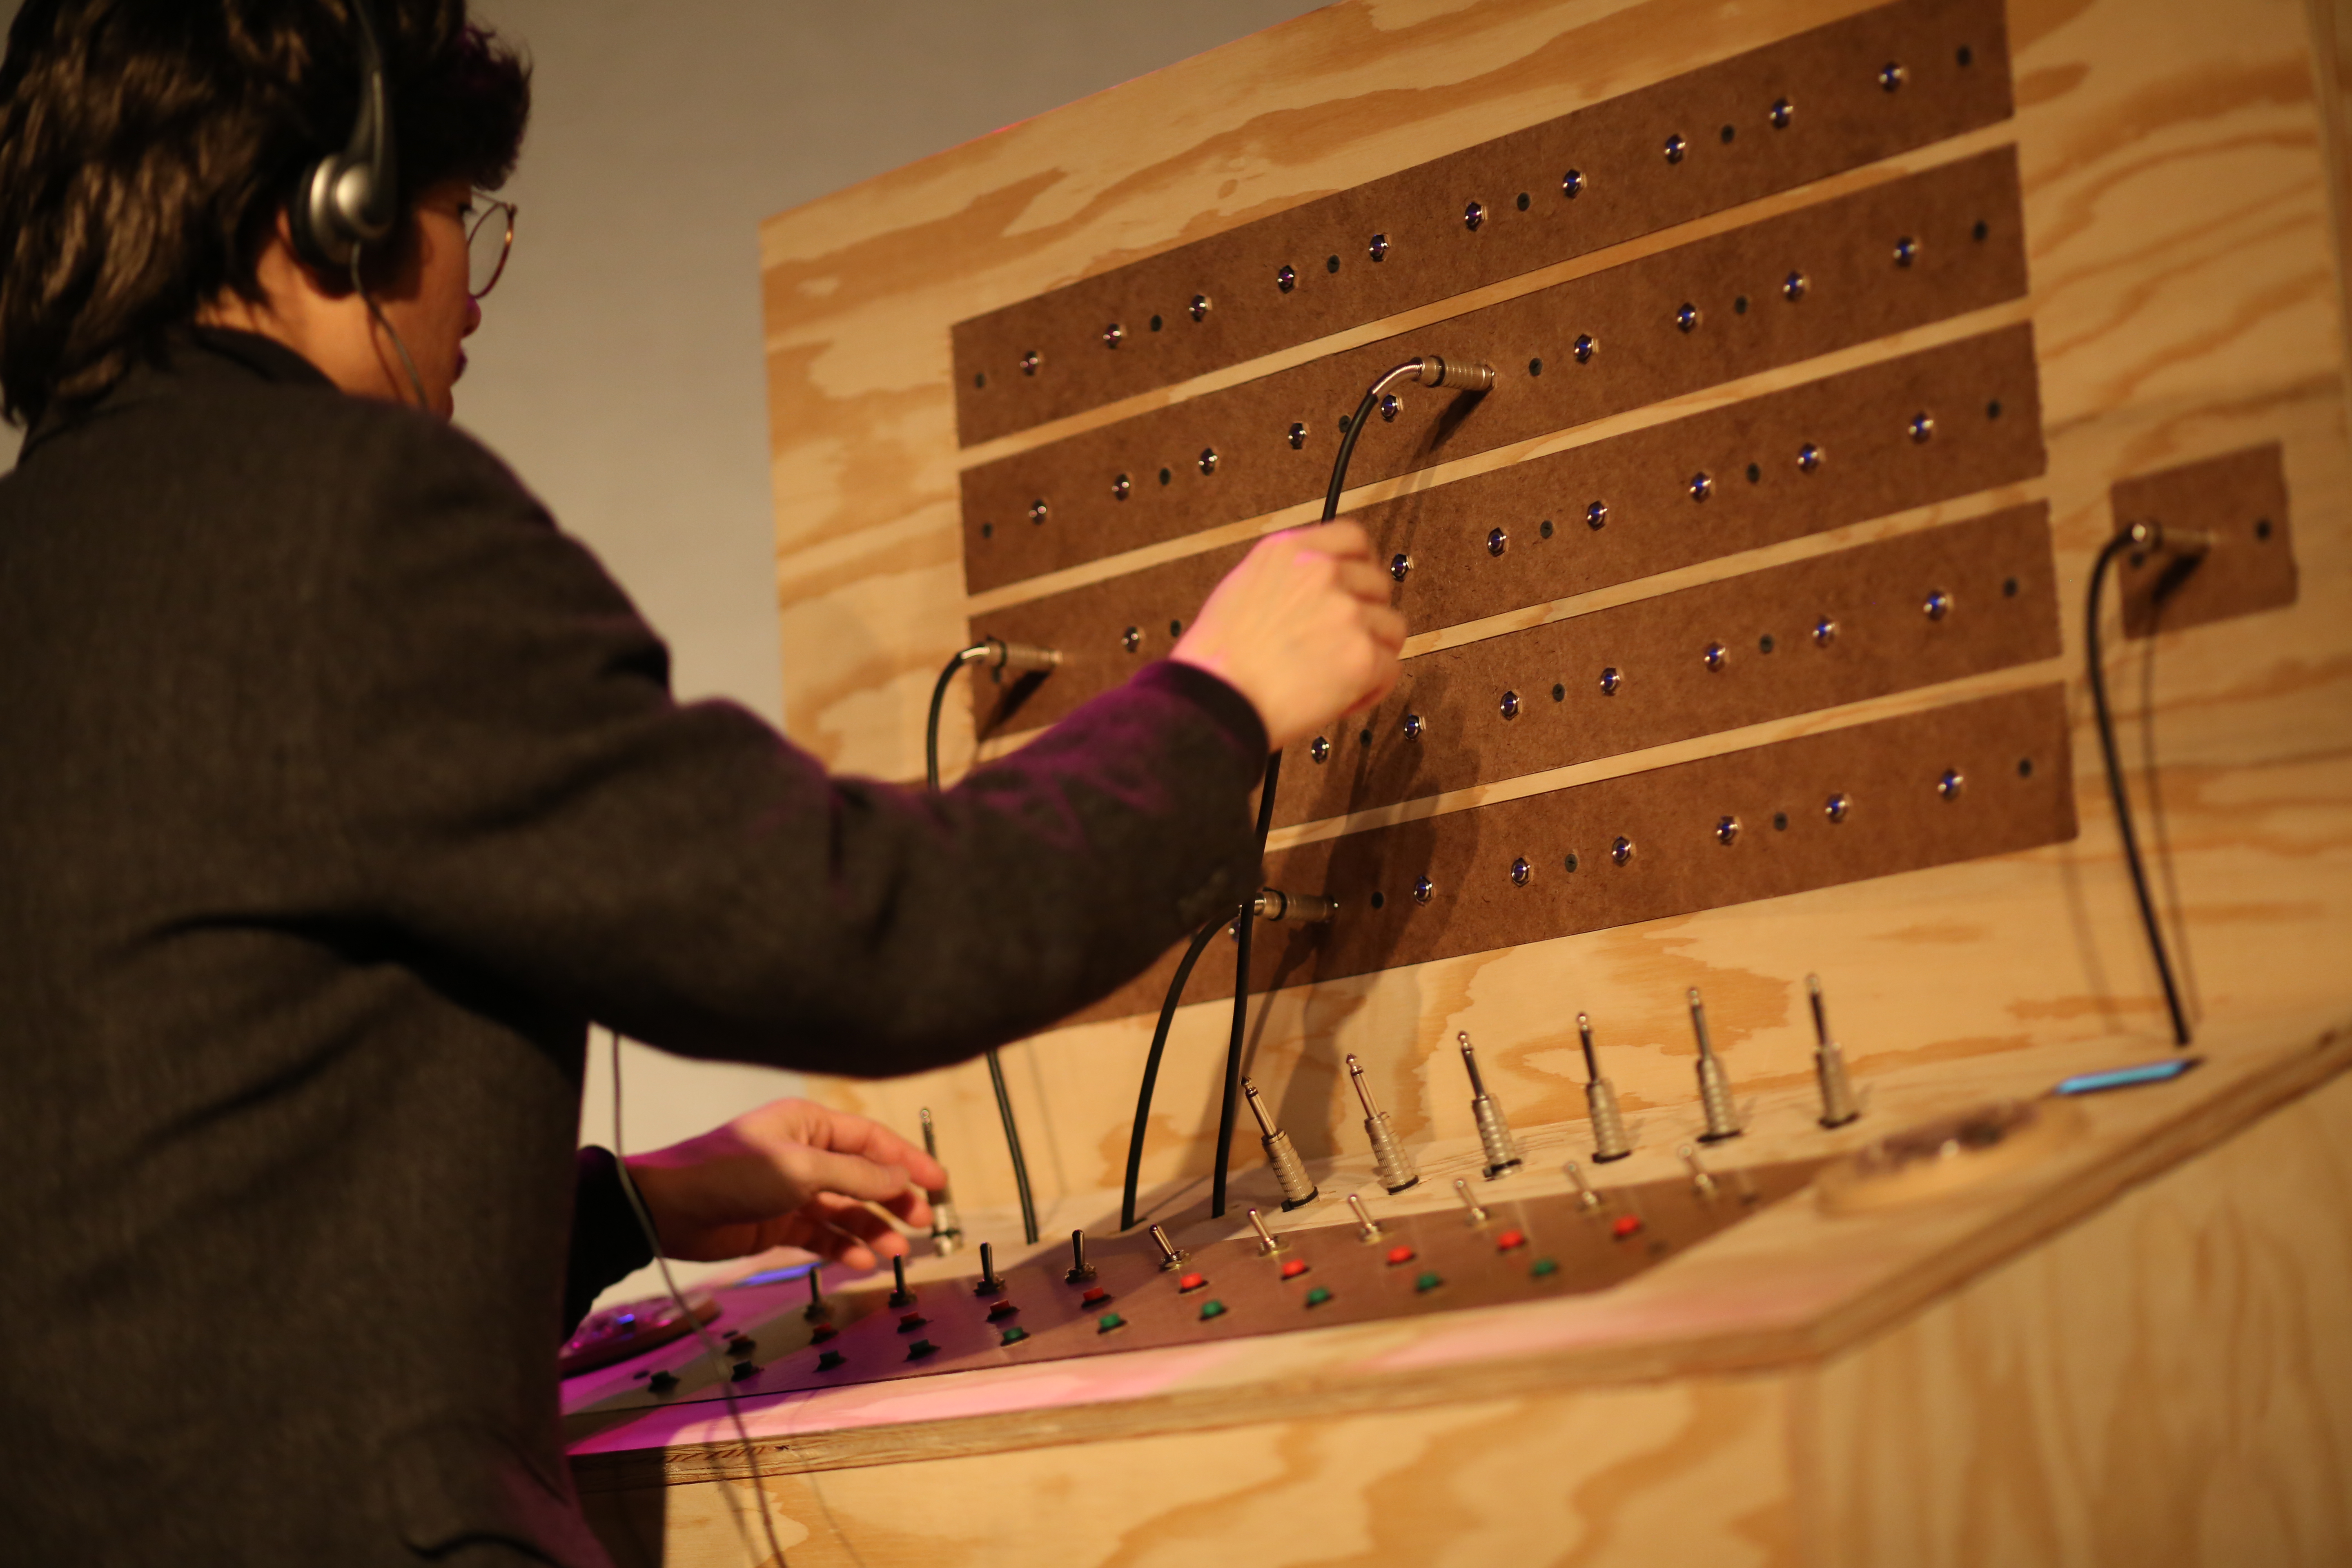 Operator is a musical interface inspired by old telephone switchboards that reverses the role of the operator and allows for the sampling and manipulation of live phone calls.